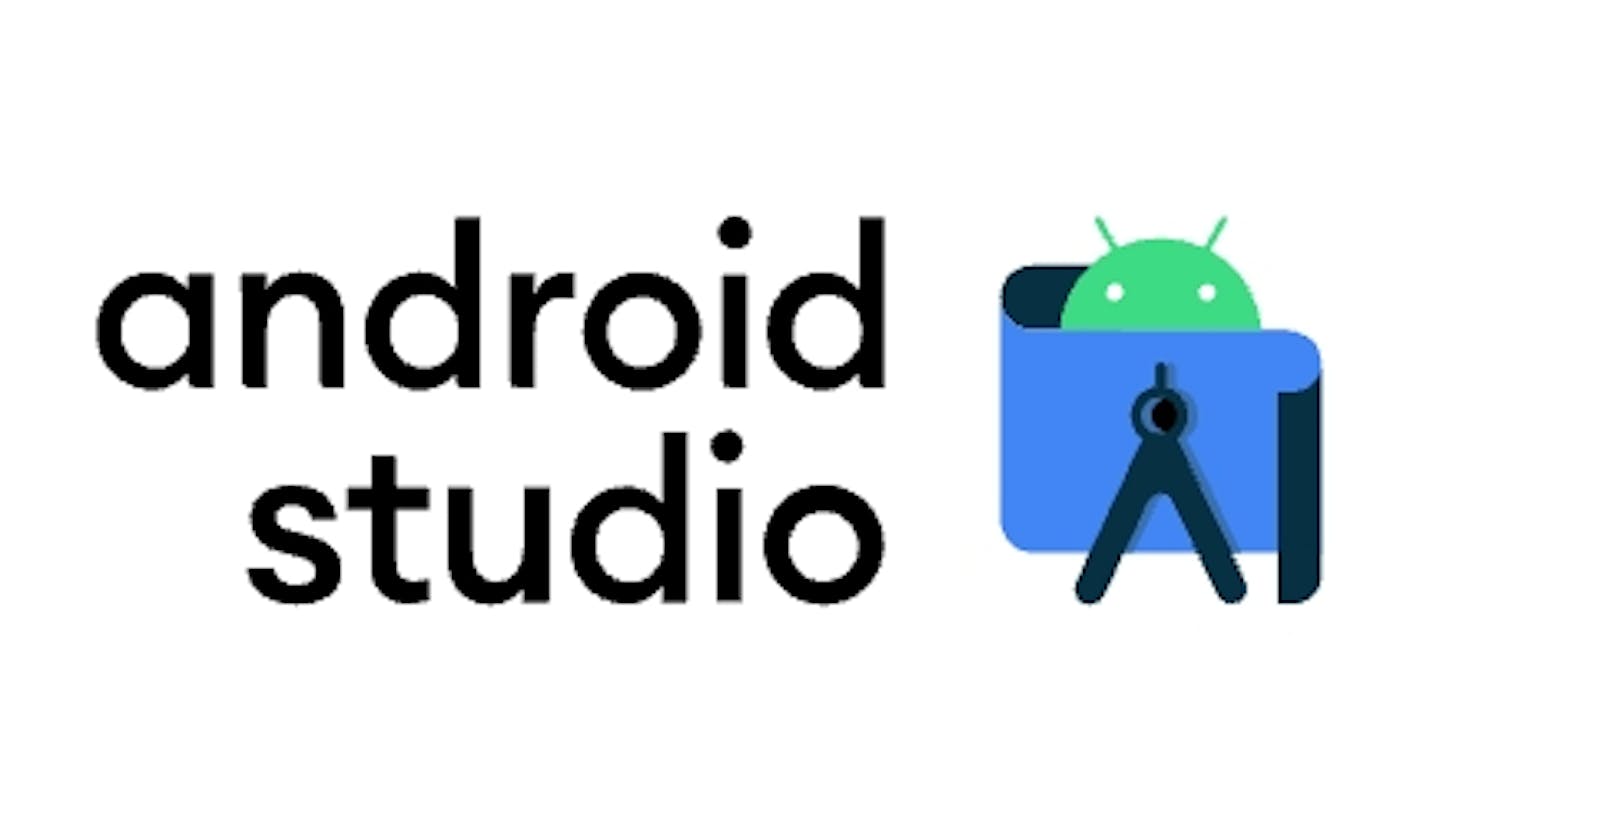 12 Android Studio shortcuts to increase your productivity